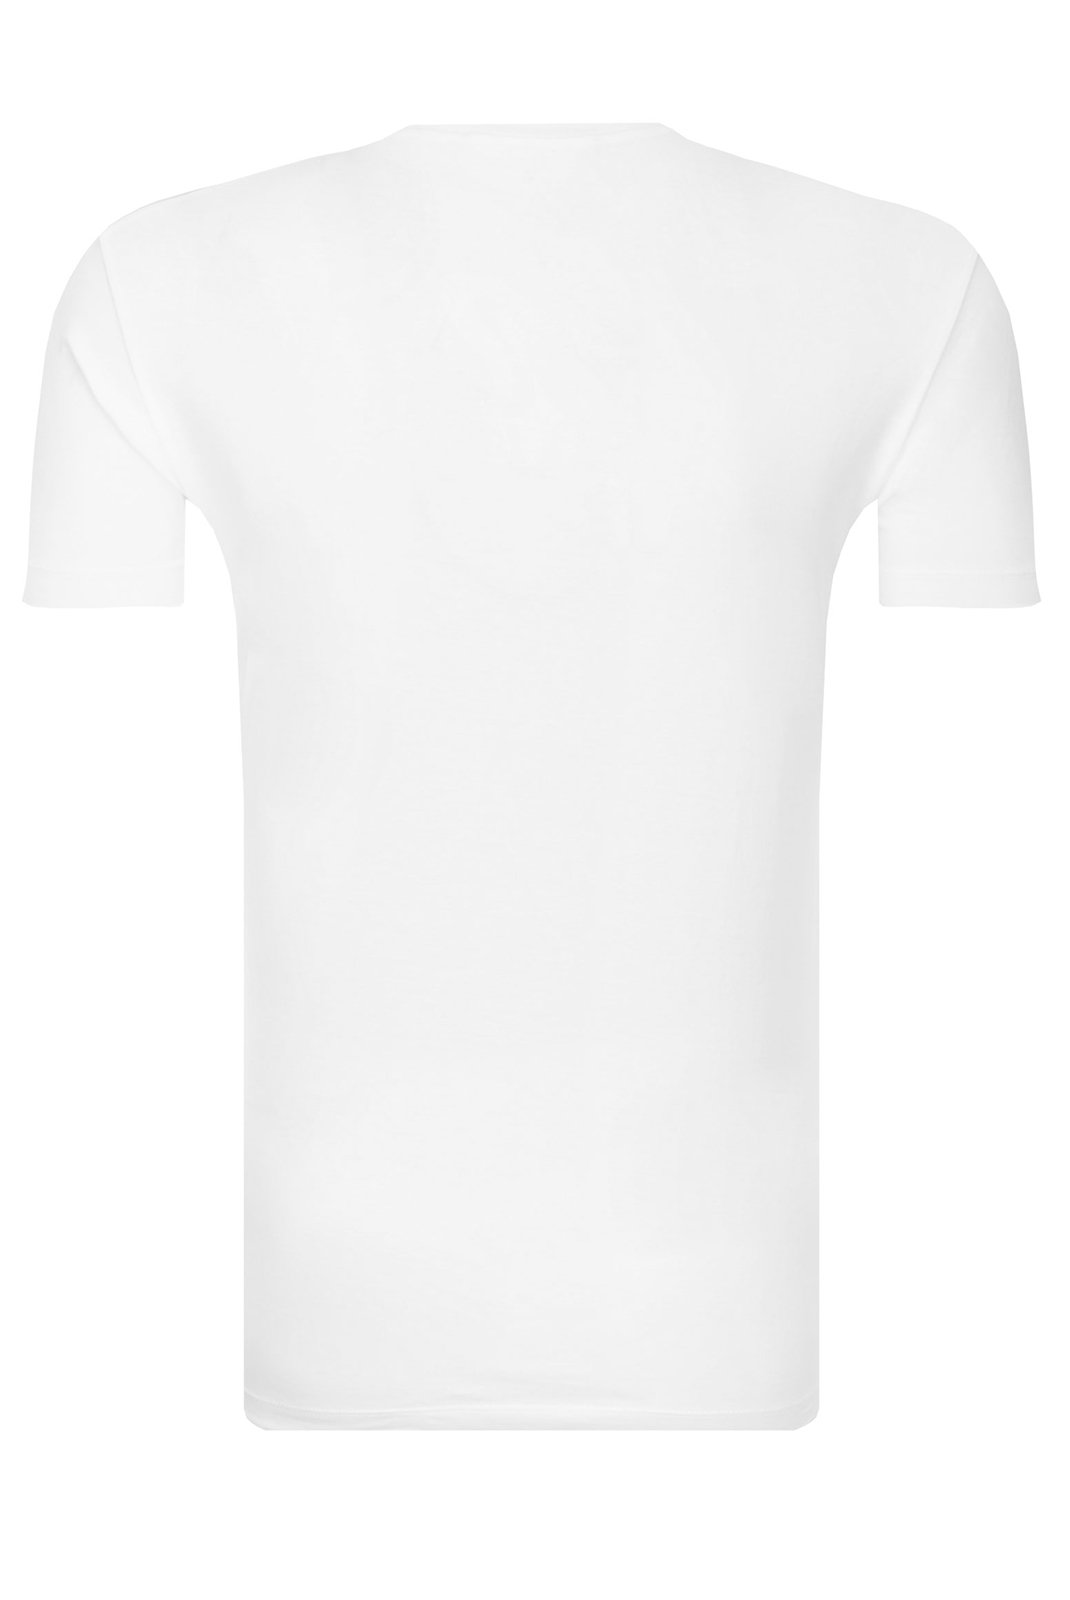 T-S manches courtes  Dsquared2 S74GD0337 100 WHITE